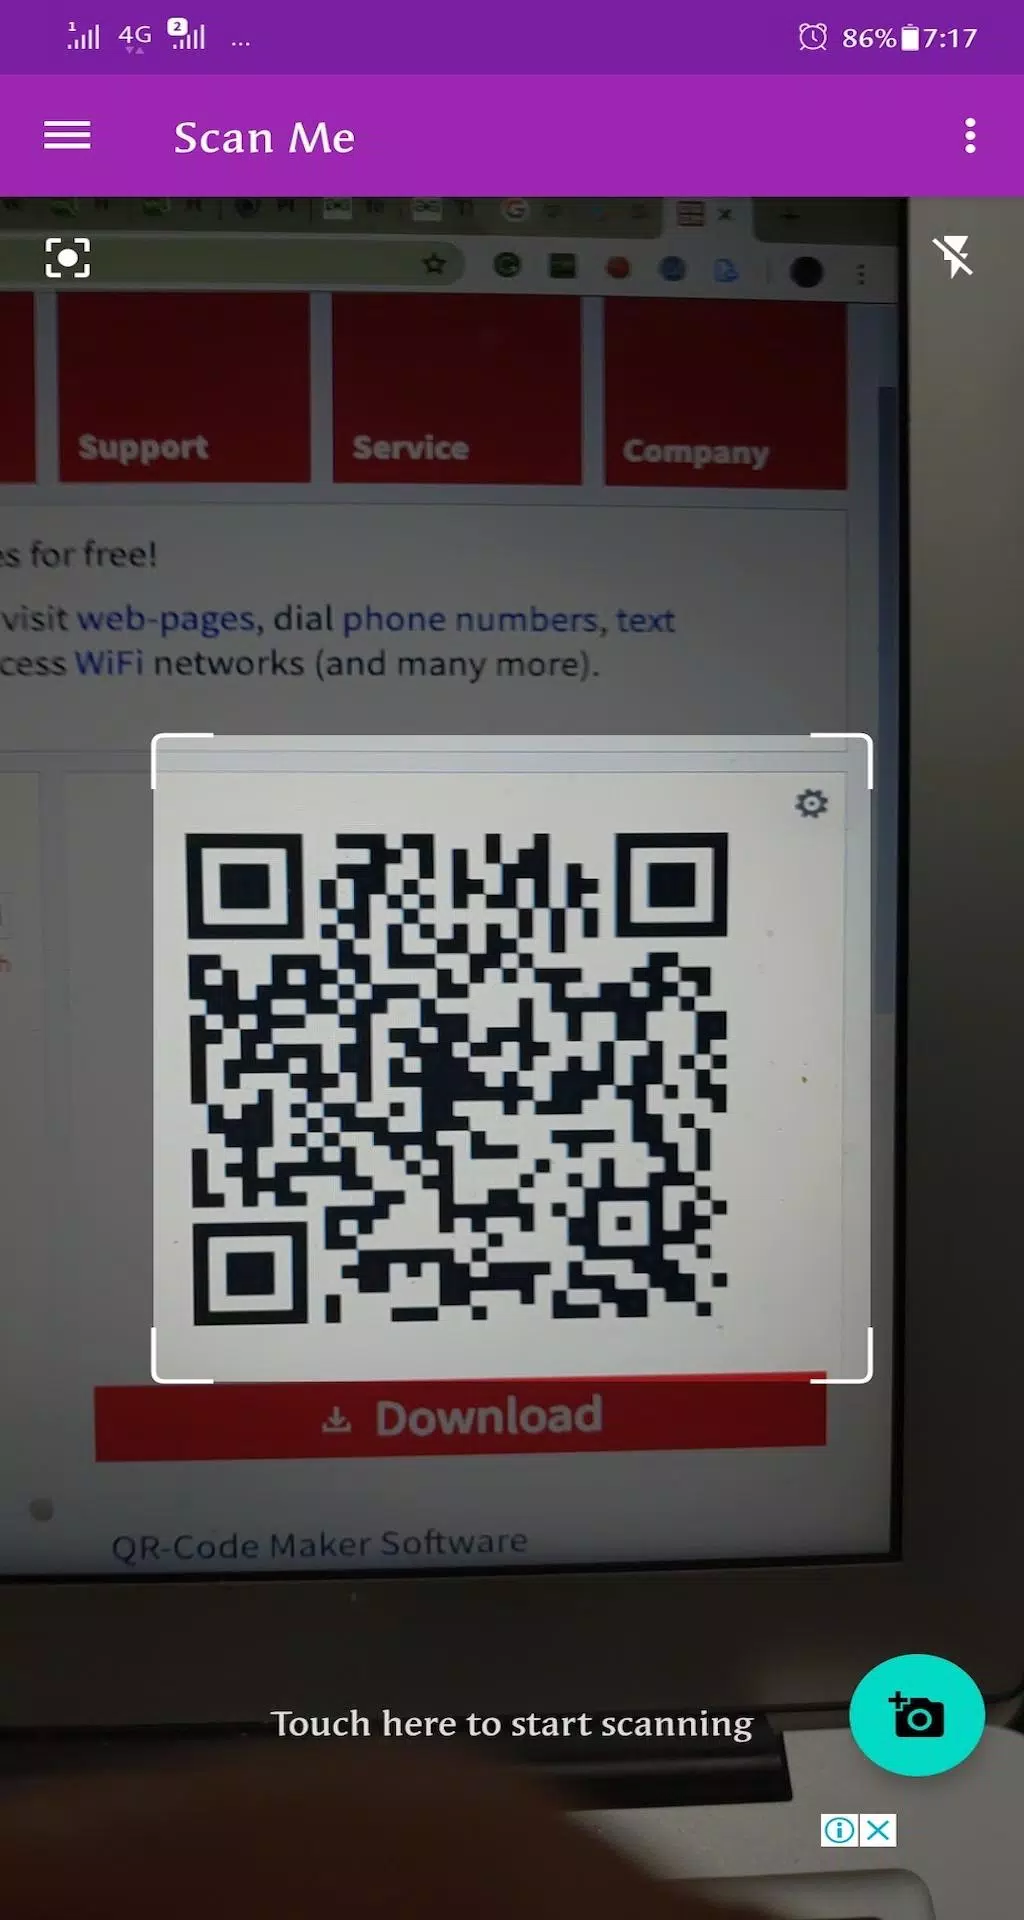 Scan Me - Barcode QR Code Scanner & Generator for Android - APK Download